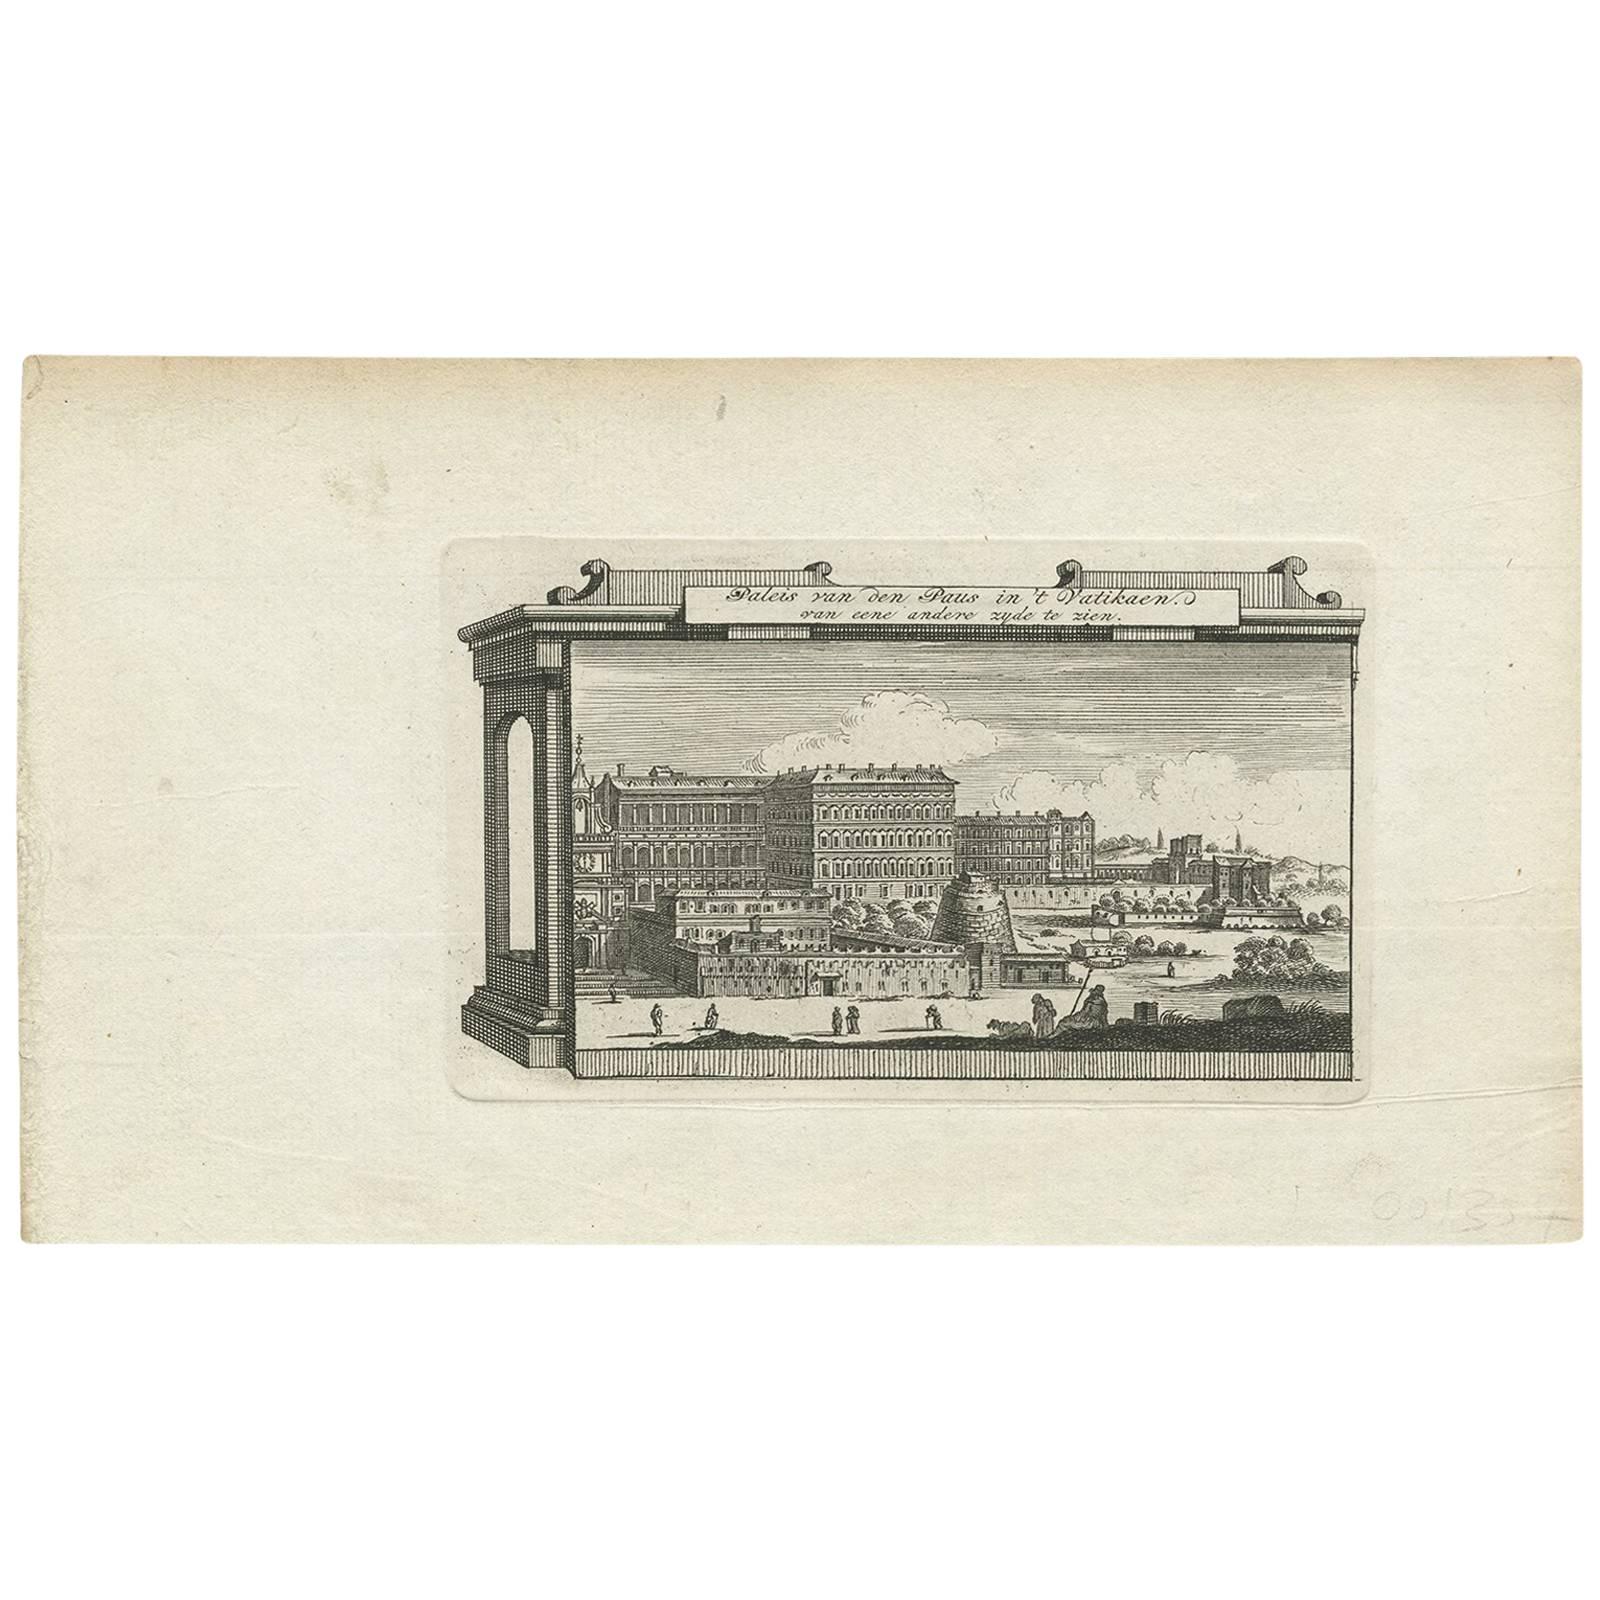 Antique Print of the Palace of the Vatican, Rome by M. de Bruyn, 1779